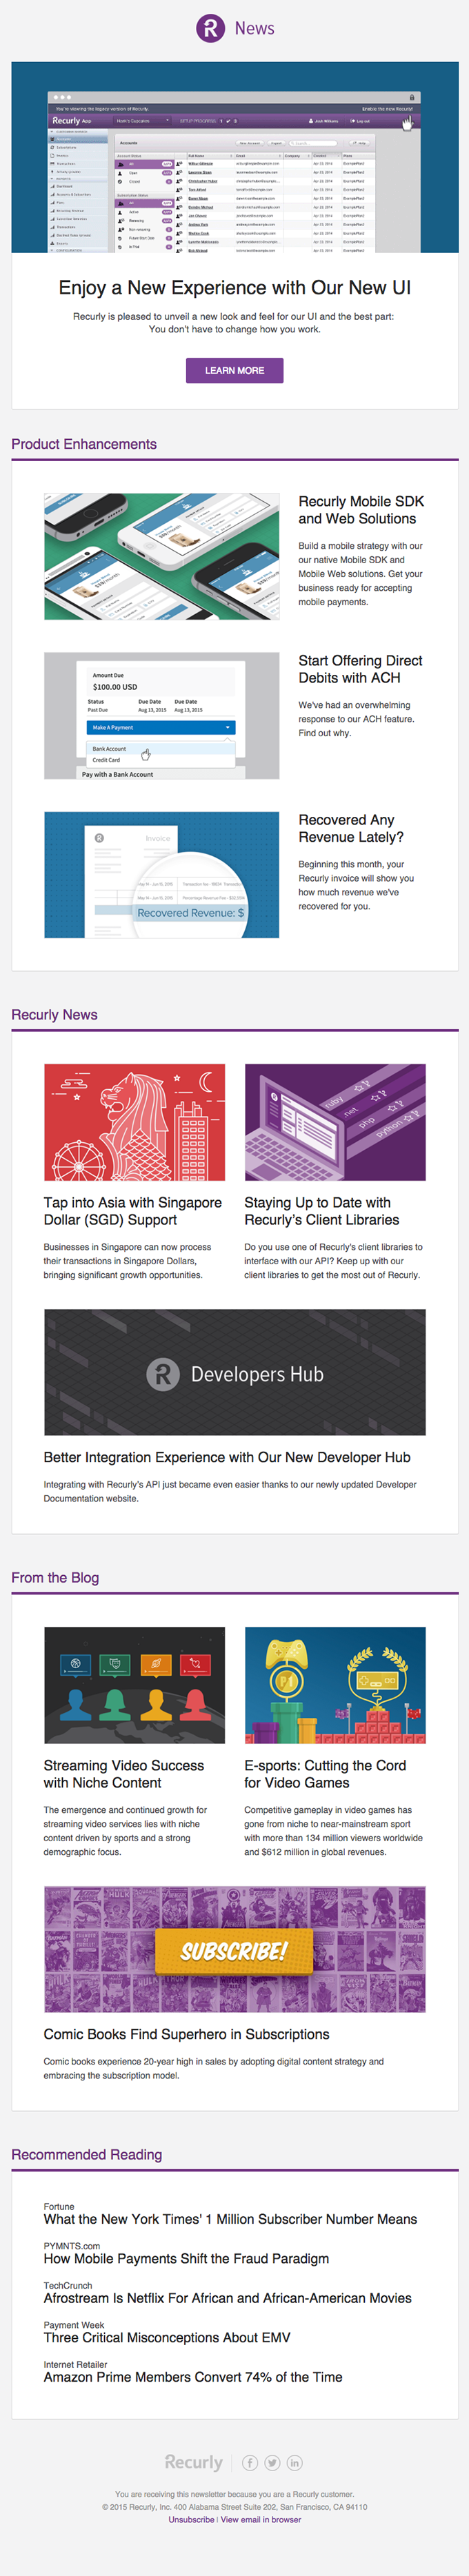 Recurly Newsletter August 2015